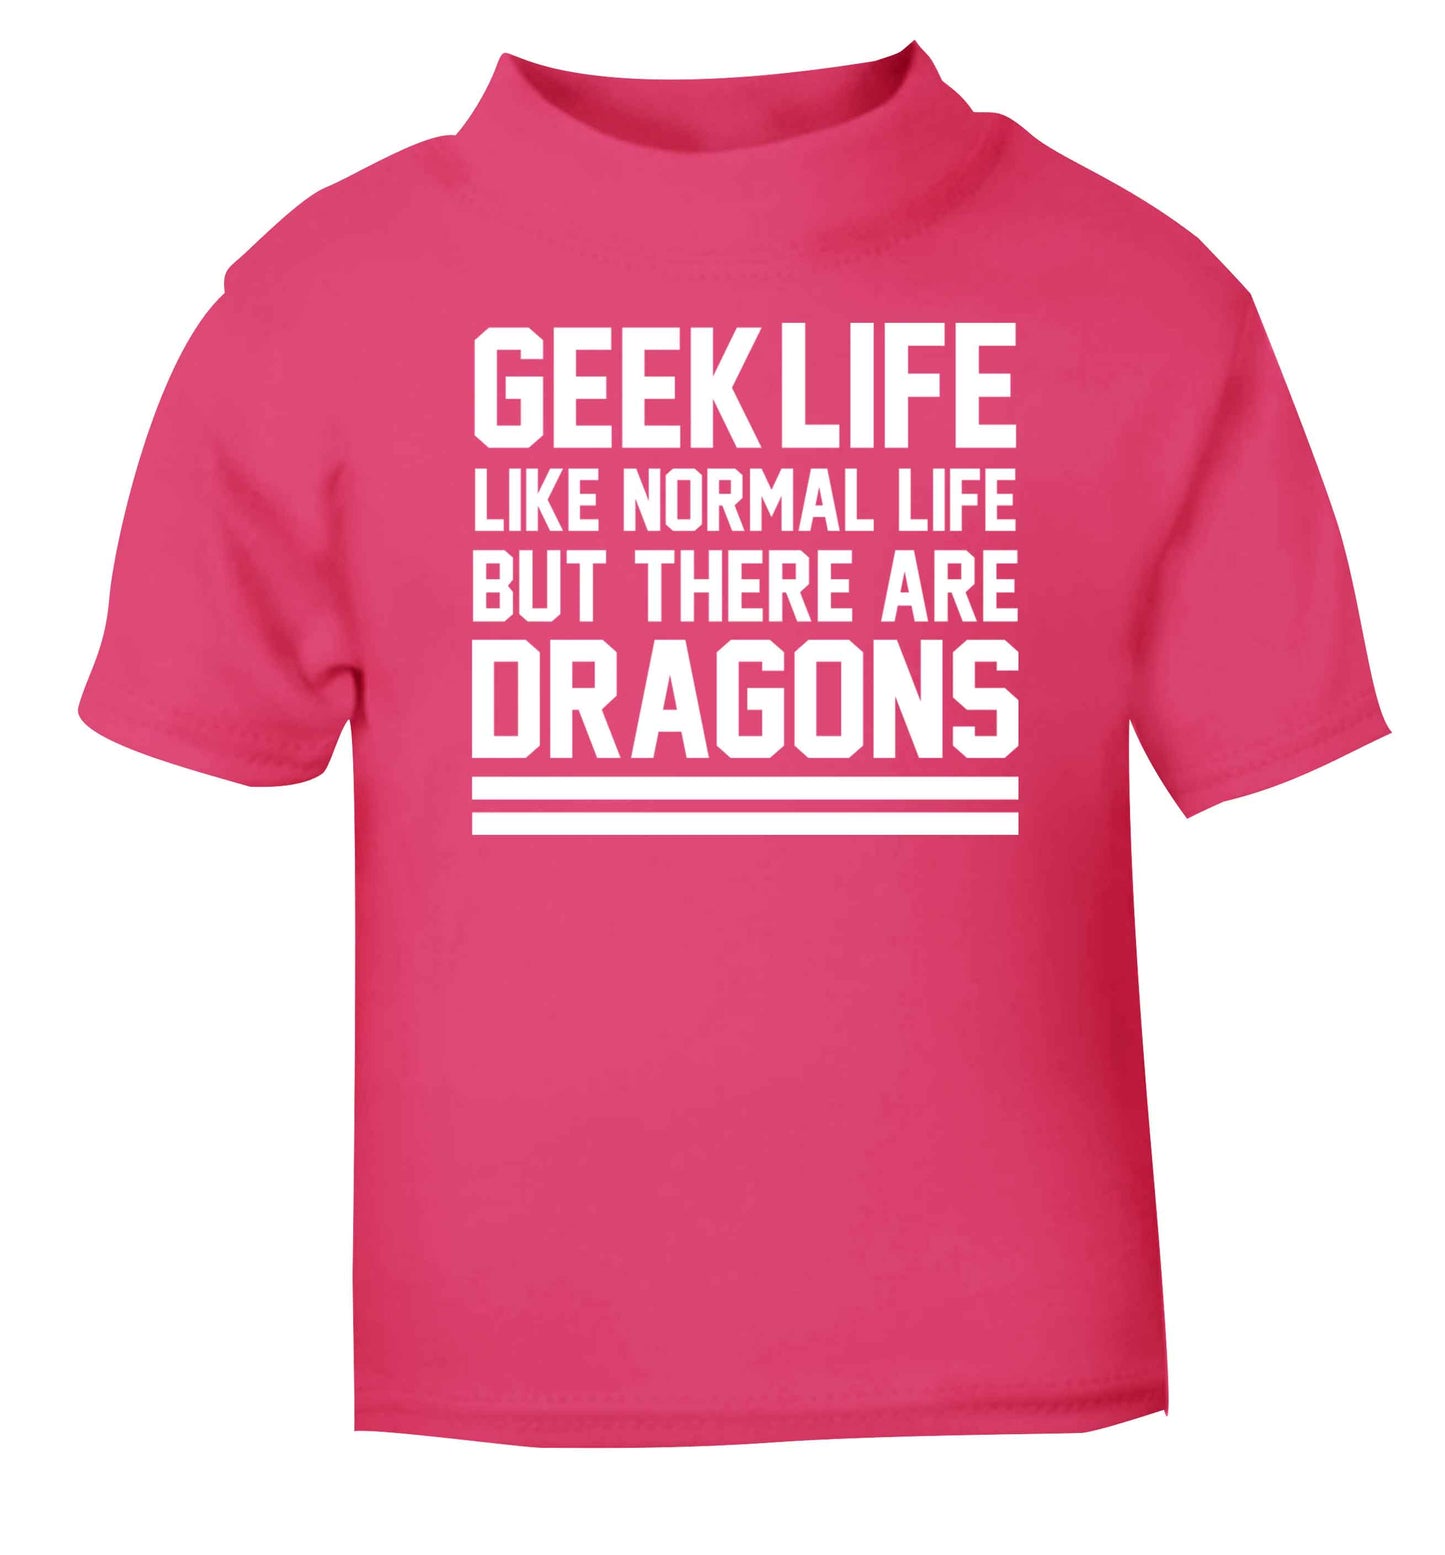 Geek life like normal life but there are dragons pink baby toddler Tshirt 2 Years